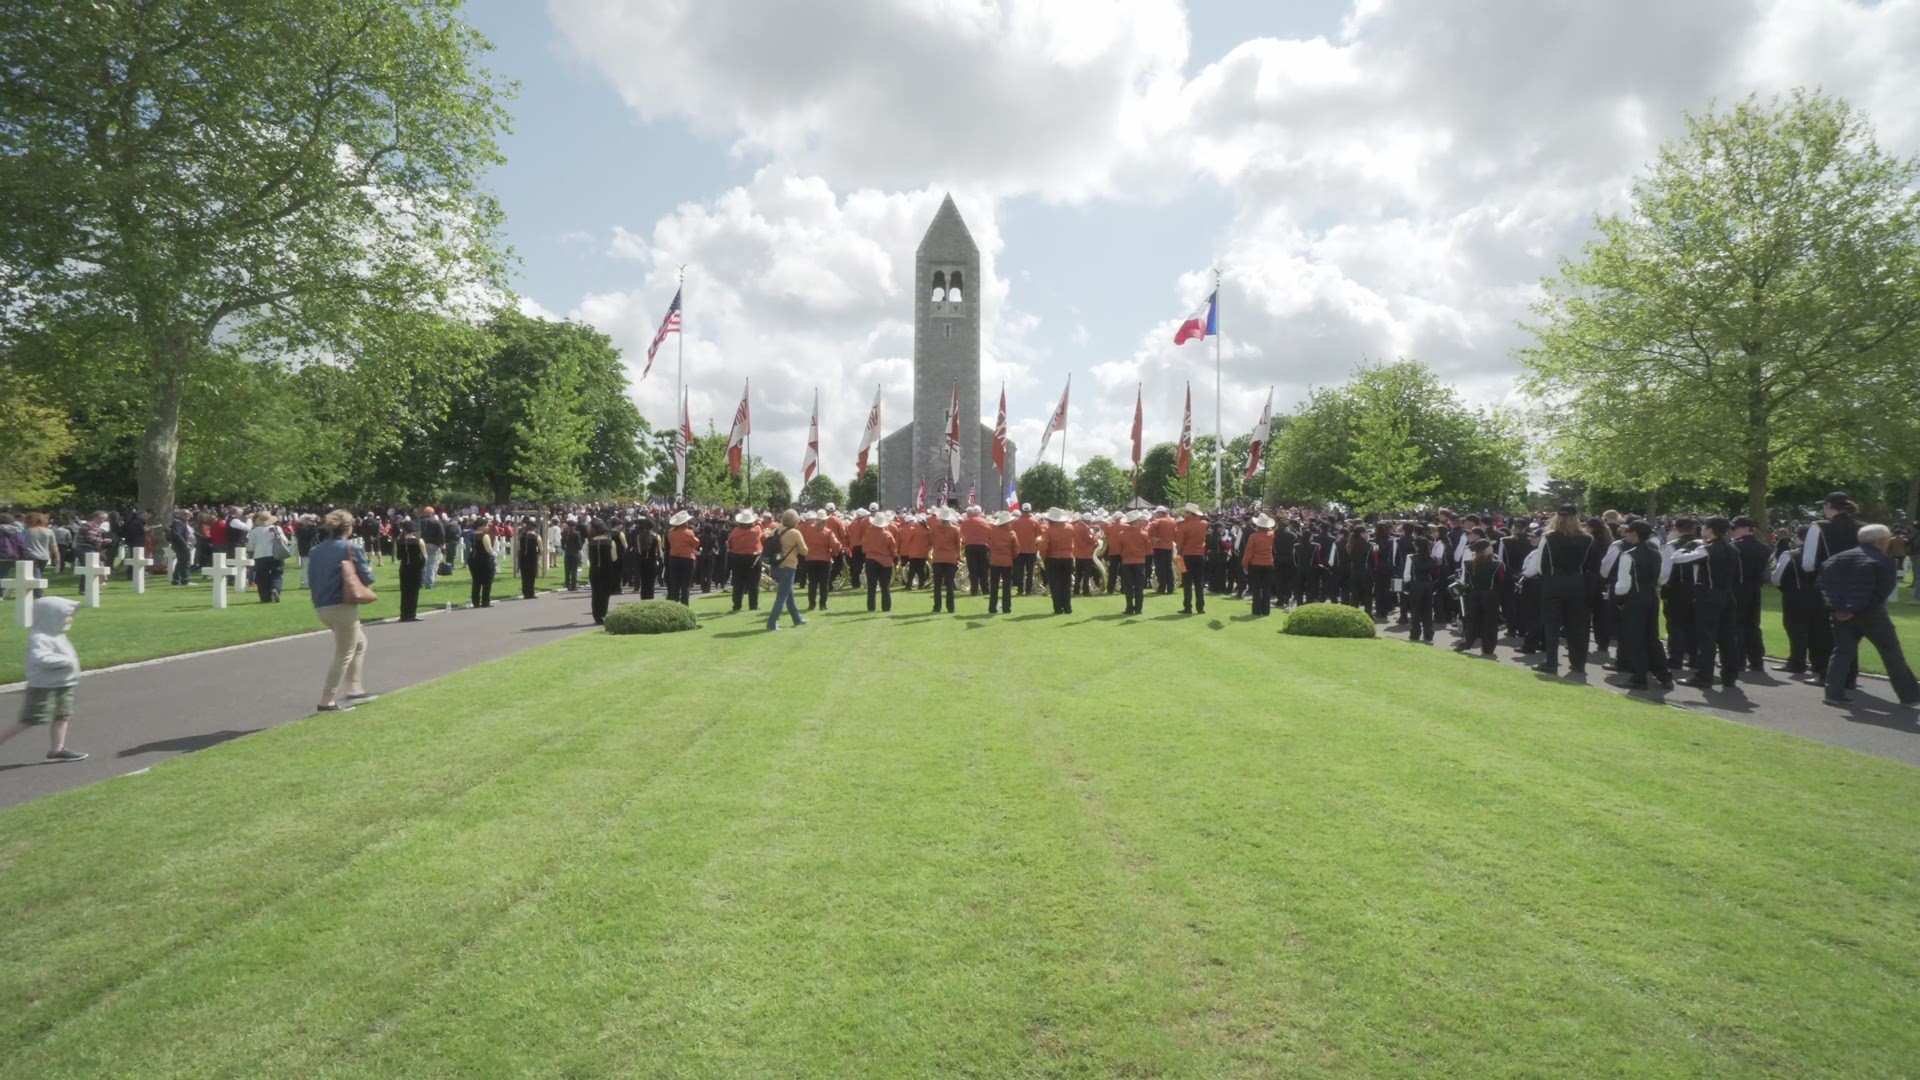 The Texas Longhorn Alumni Band performed at the 75th anniversary of D-Day in France.